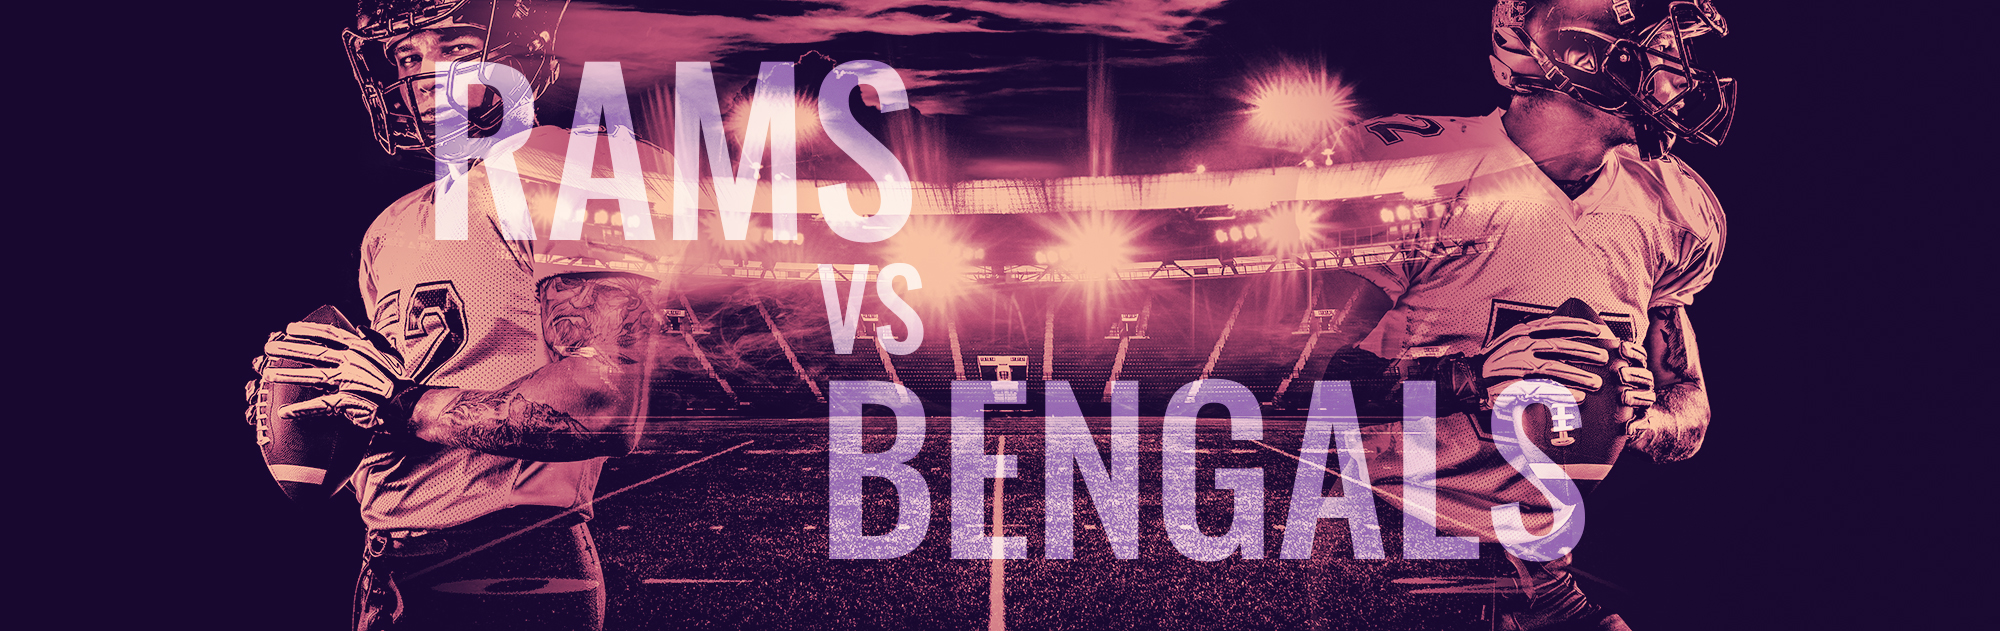 It's here, and we're excited about the final brawl at the 'Bowl between the Rams and the Bengals.